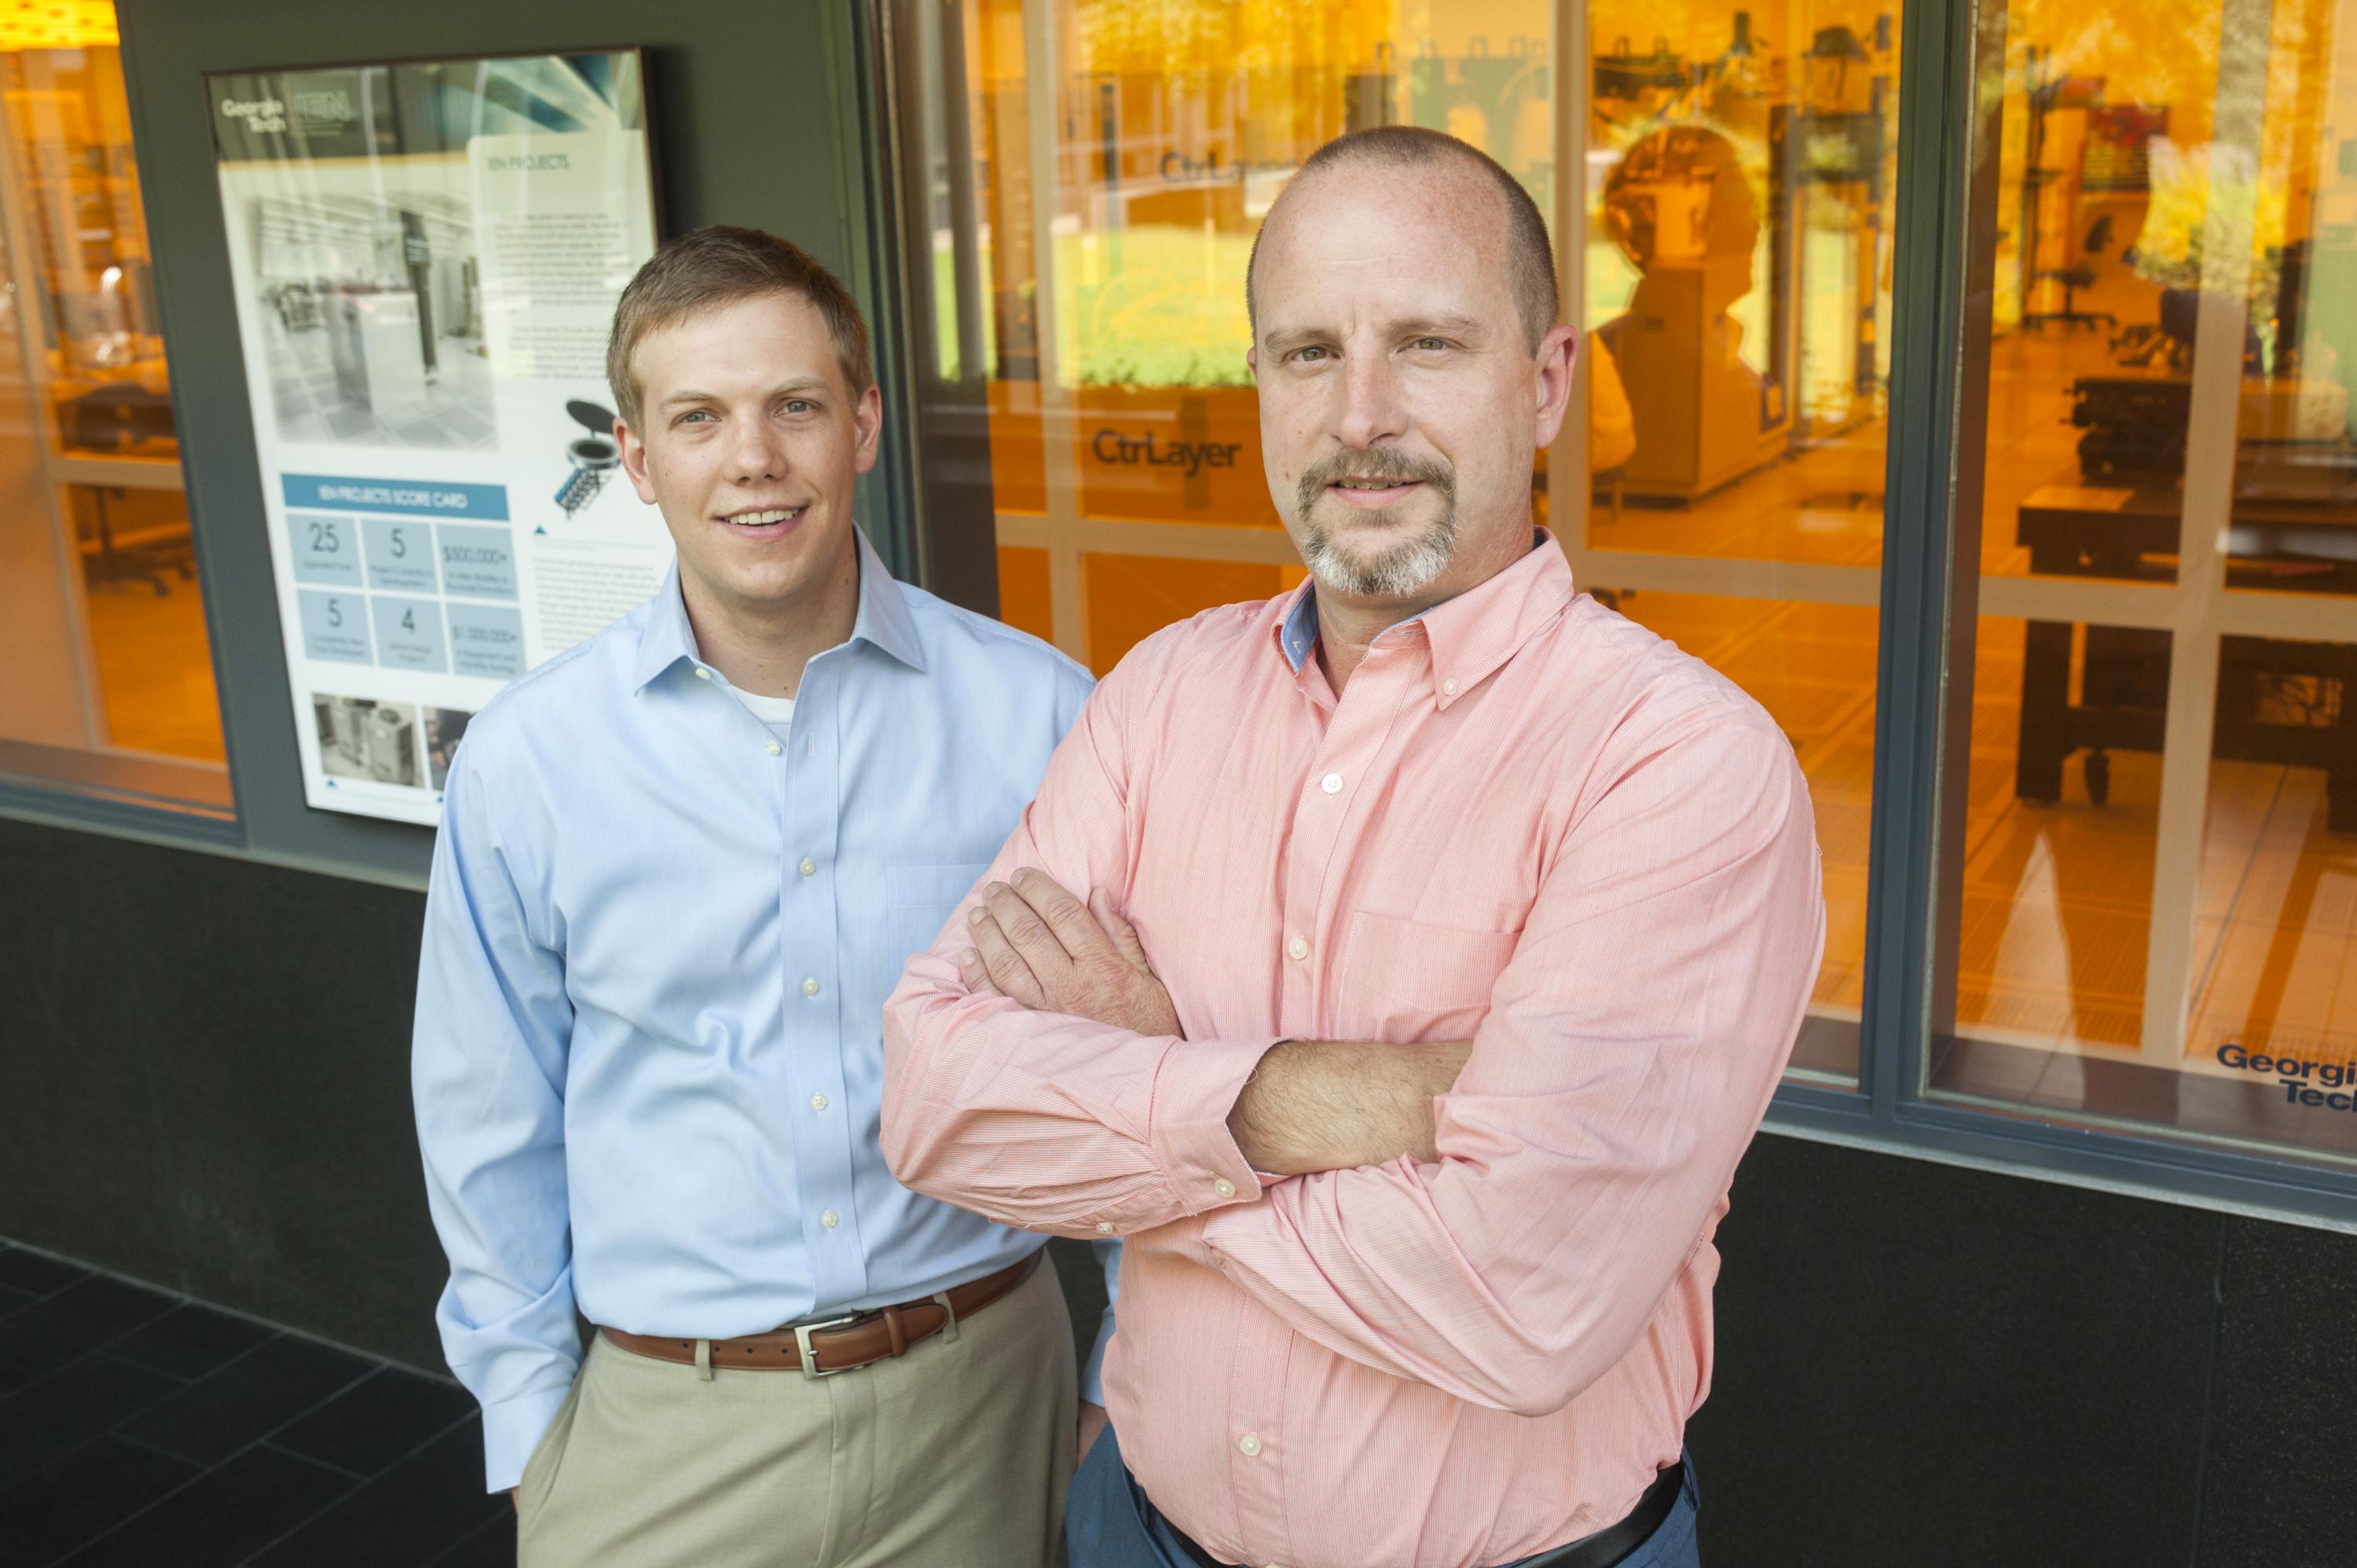 Research engineer and student Brooks Tellekamp (left) and Alan Doolittle, professor of electrical and computer engineering, stand outside the clean room at Georgia Tech's Marcus Nanotechnology Building. Credit: Georgia Tech / Christopher Moore